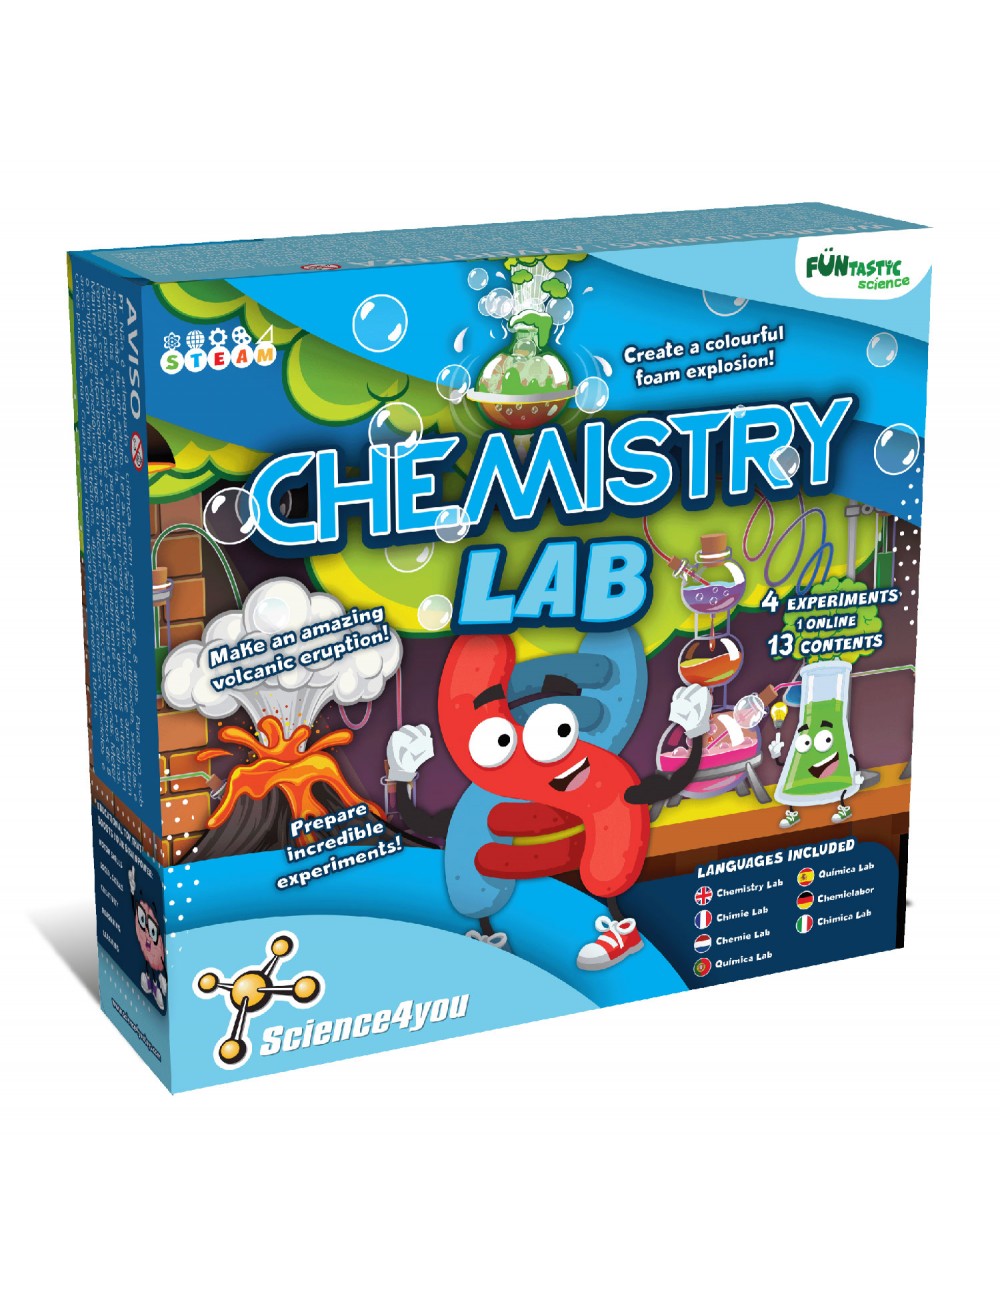 Primary Science Lab Set - Funique - Science games, toys and